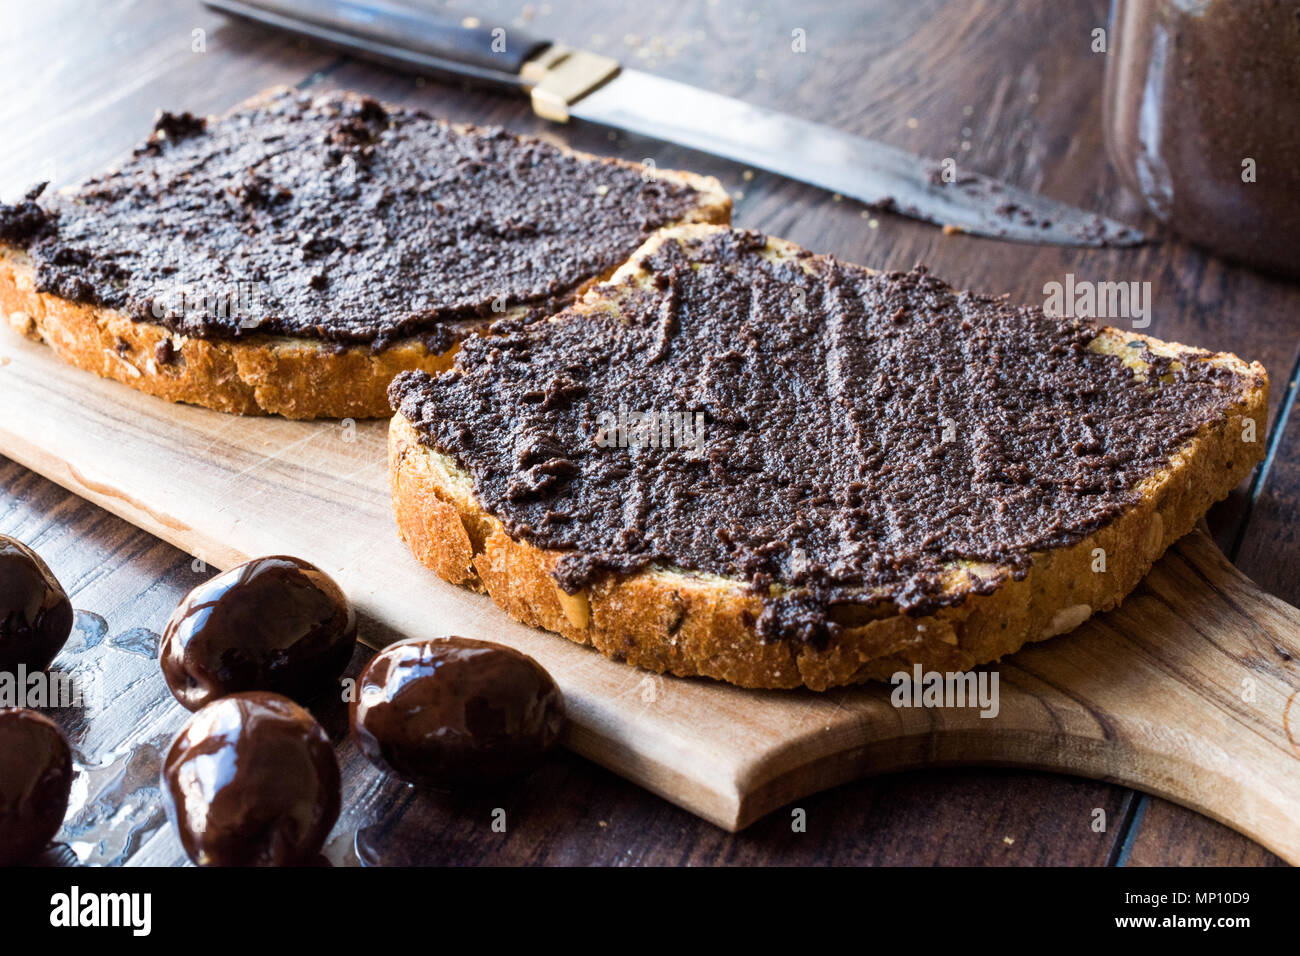 Black Olive Tapenade on Bread with Knife and Jar. Organic Food. Stock Photo